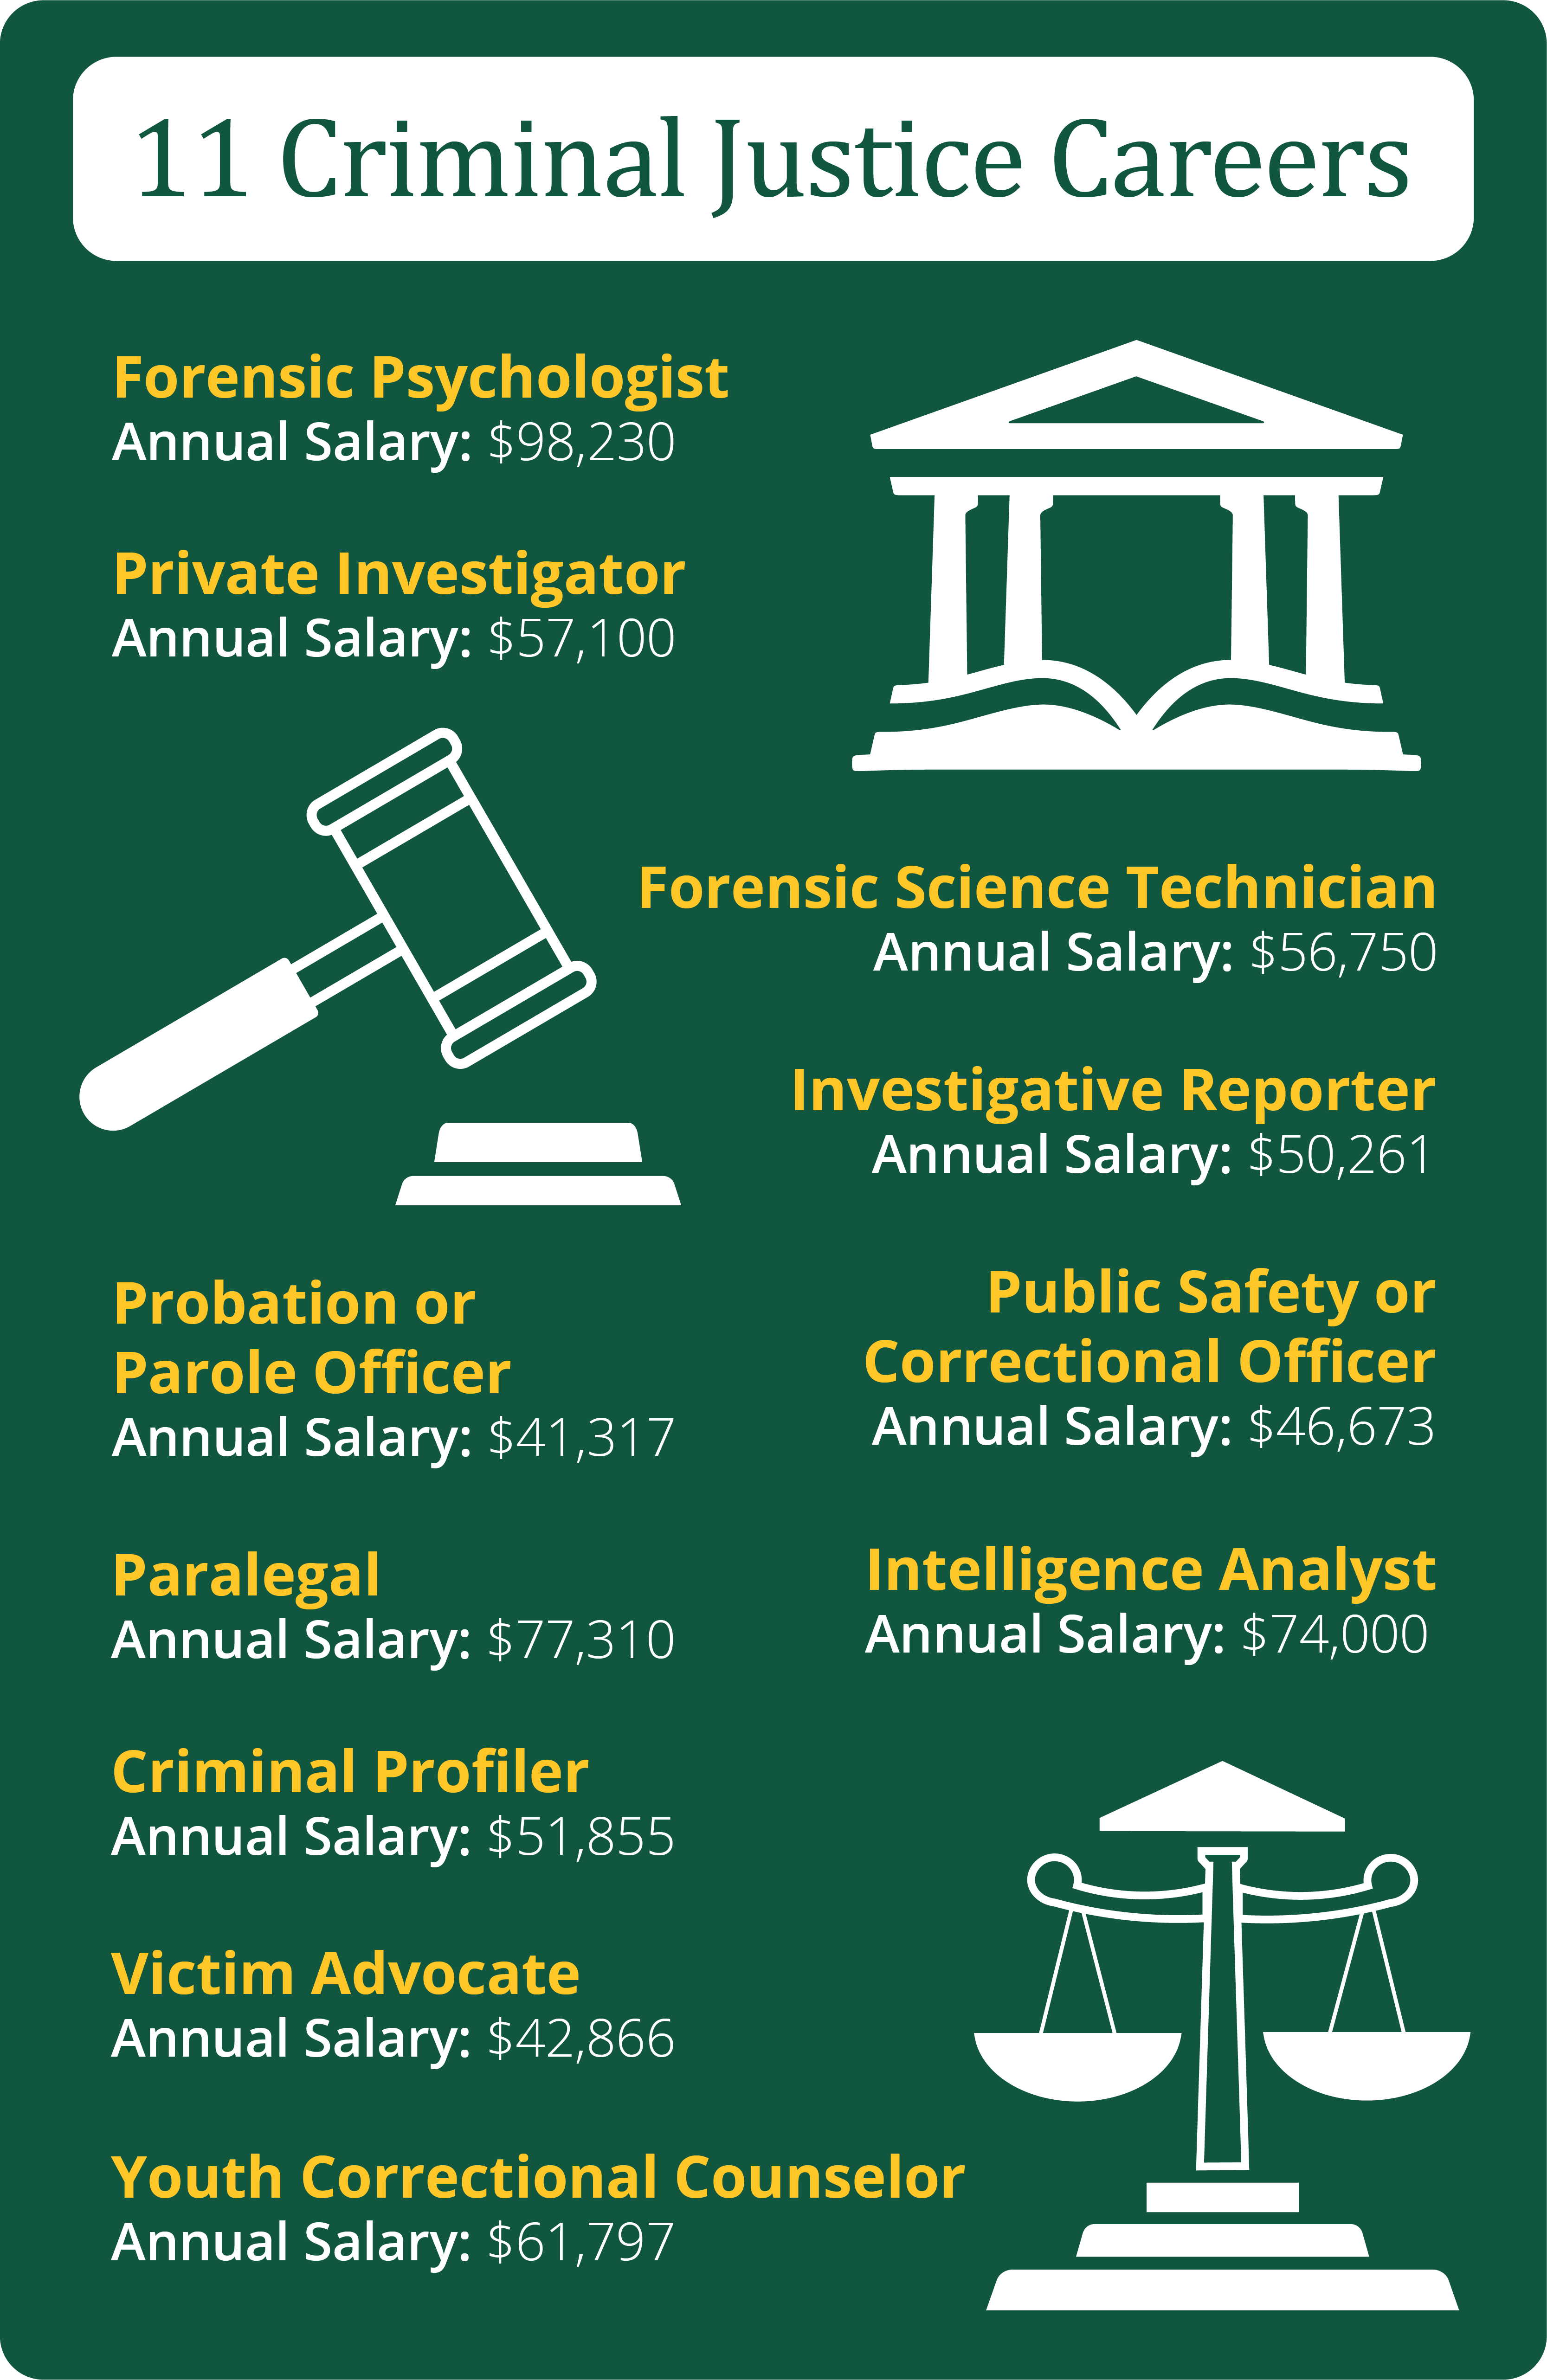 Criminal Justice Jobs: 11 Careers You Can Pursue With a Criminal ...